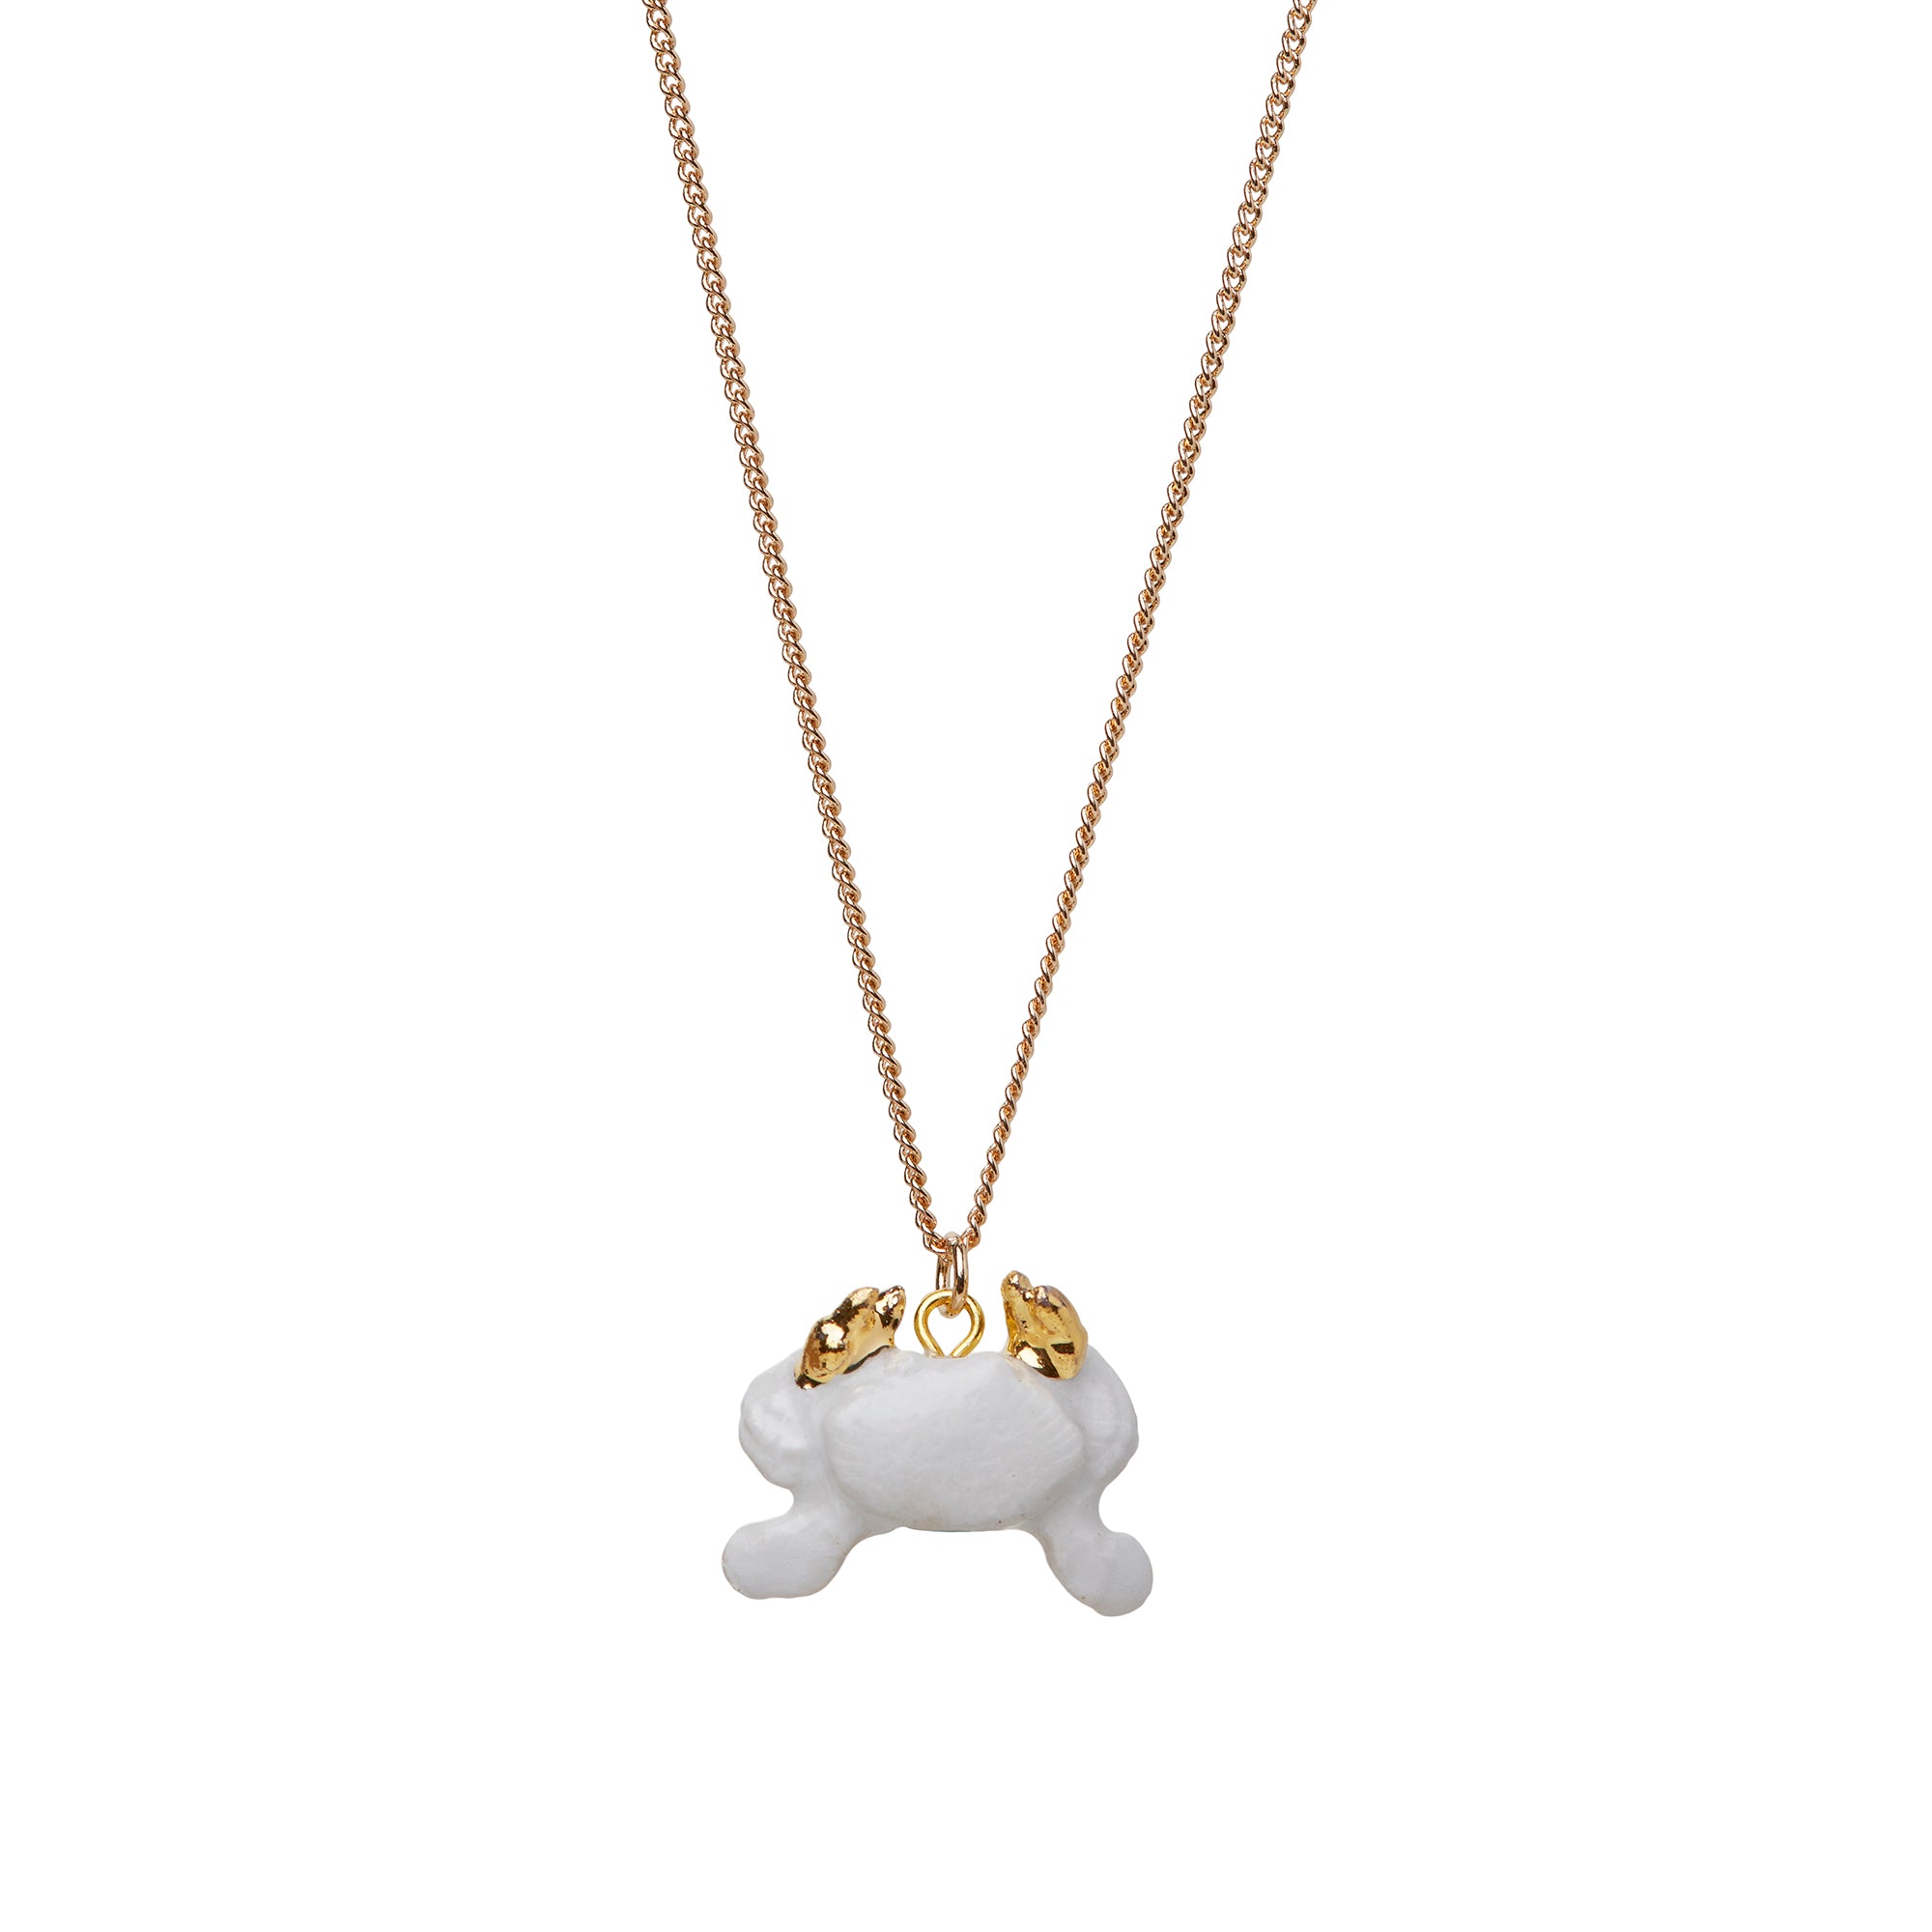 Tiny White Crab with Gold Claws Necklace